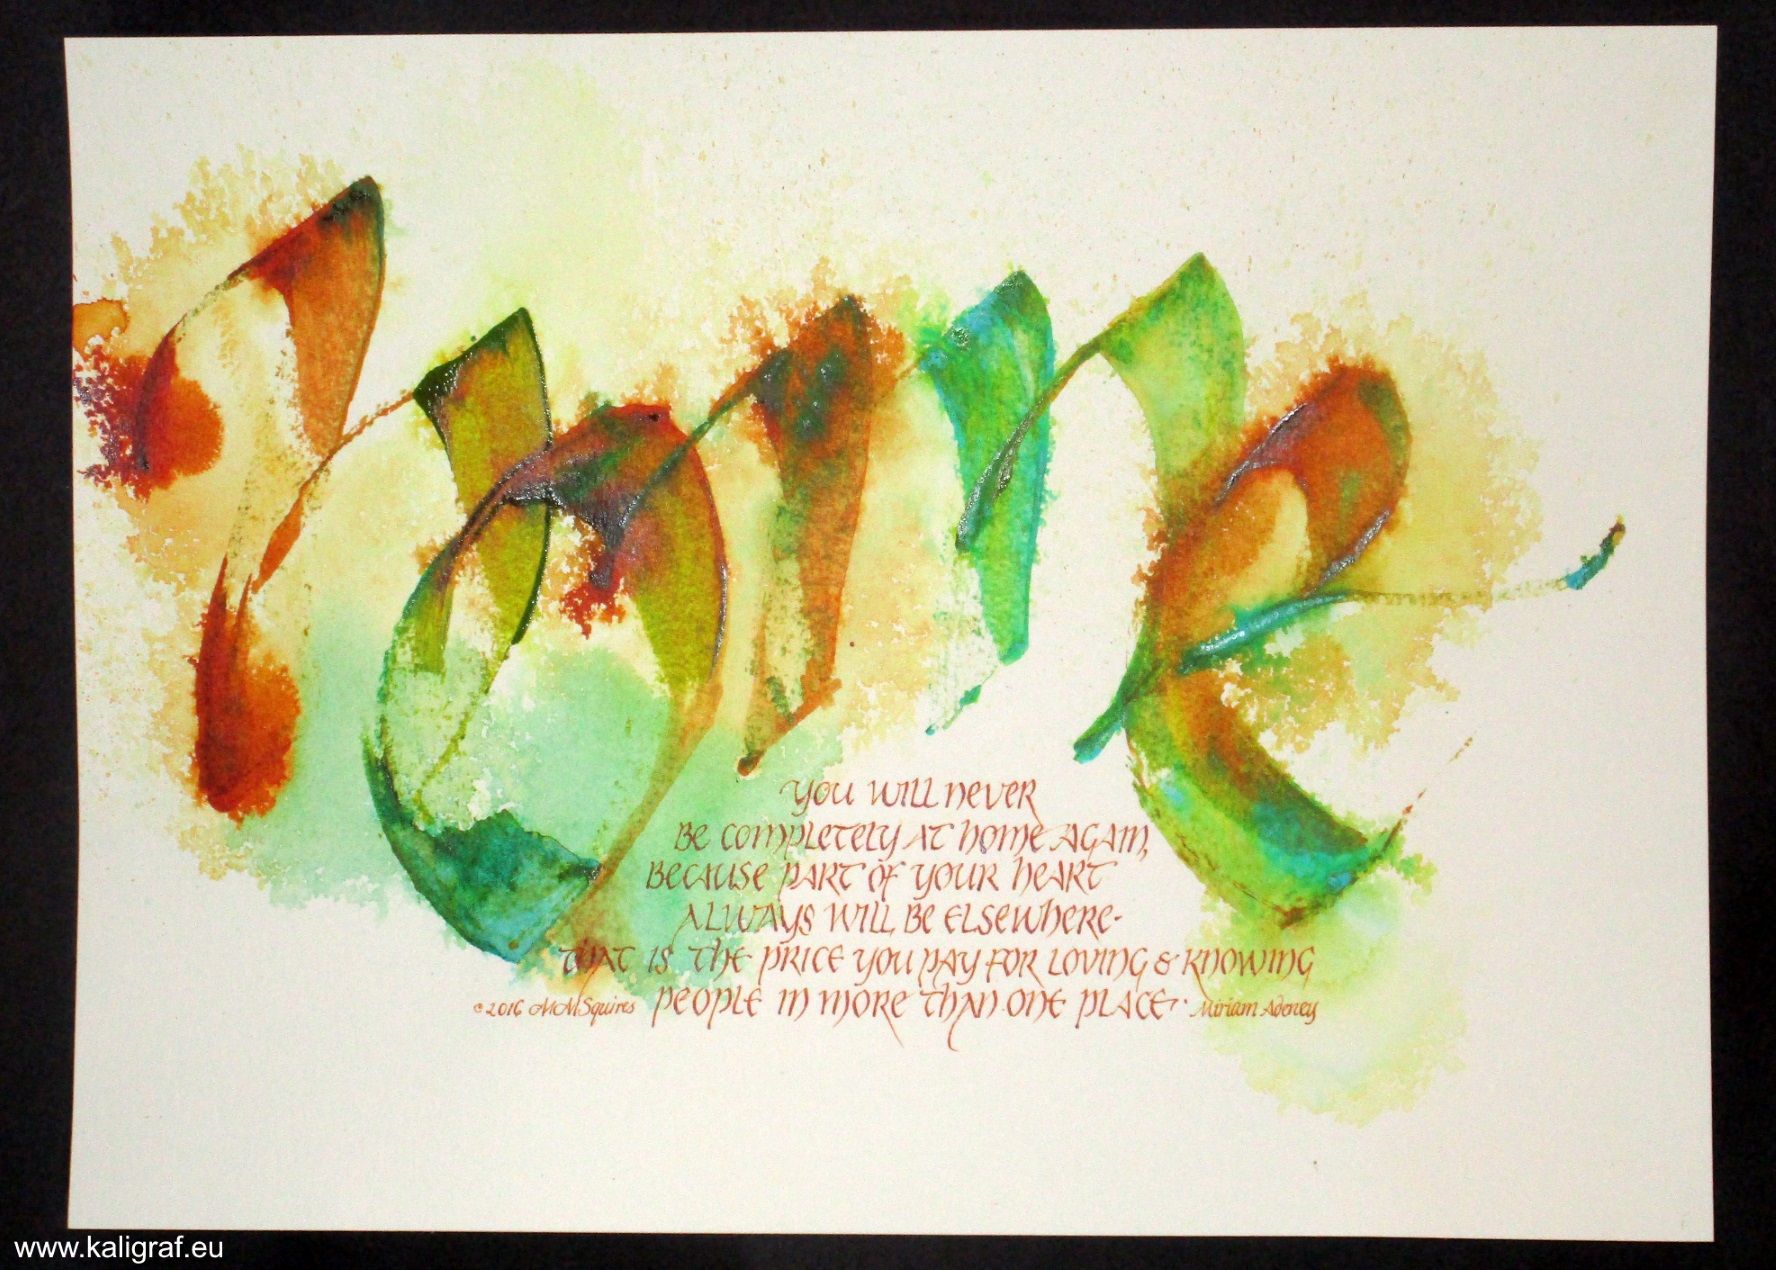 Home - calligraphy by Maureen Squires